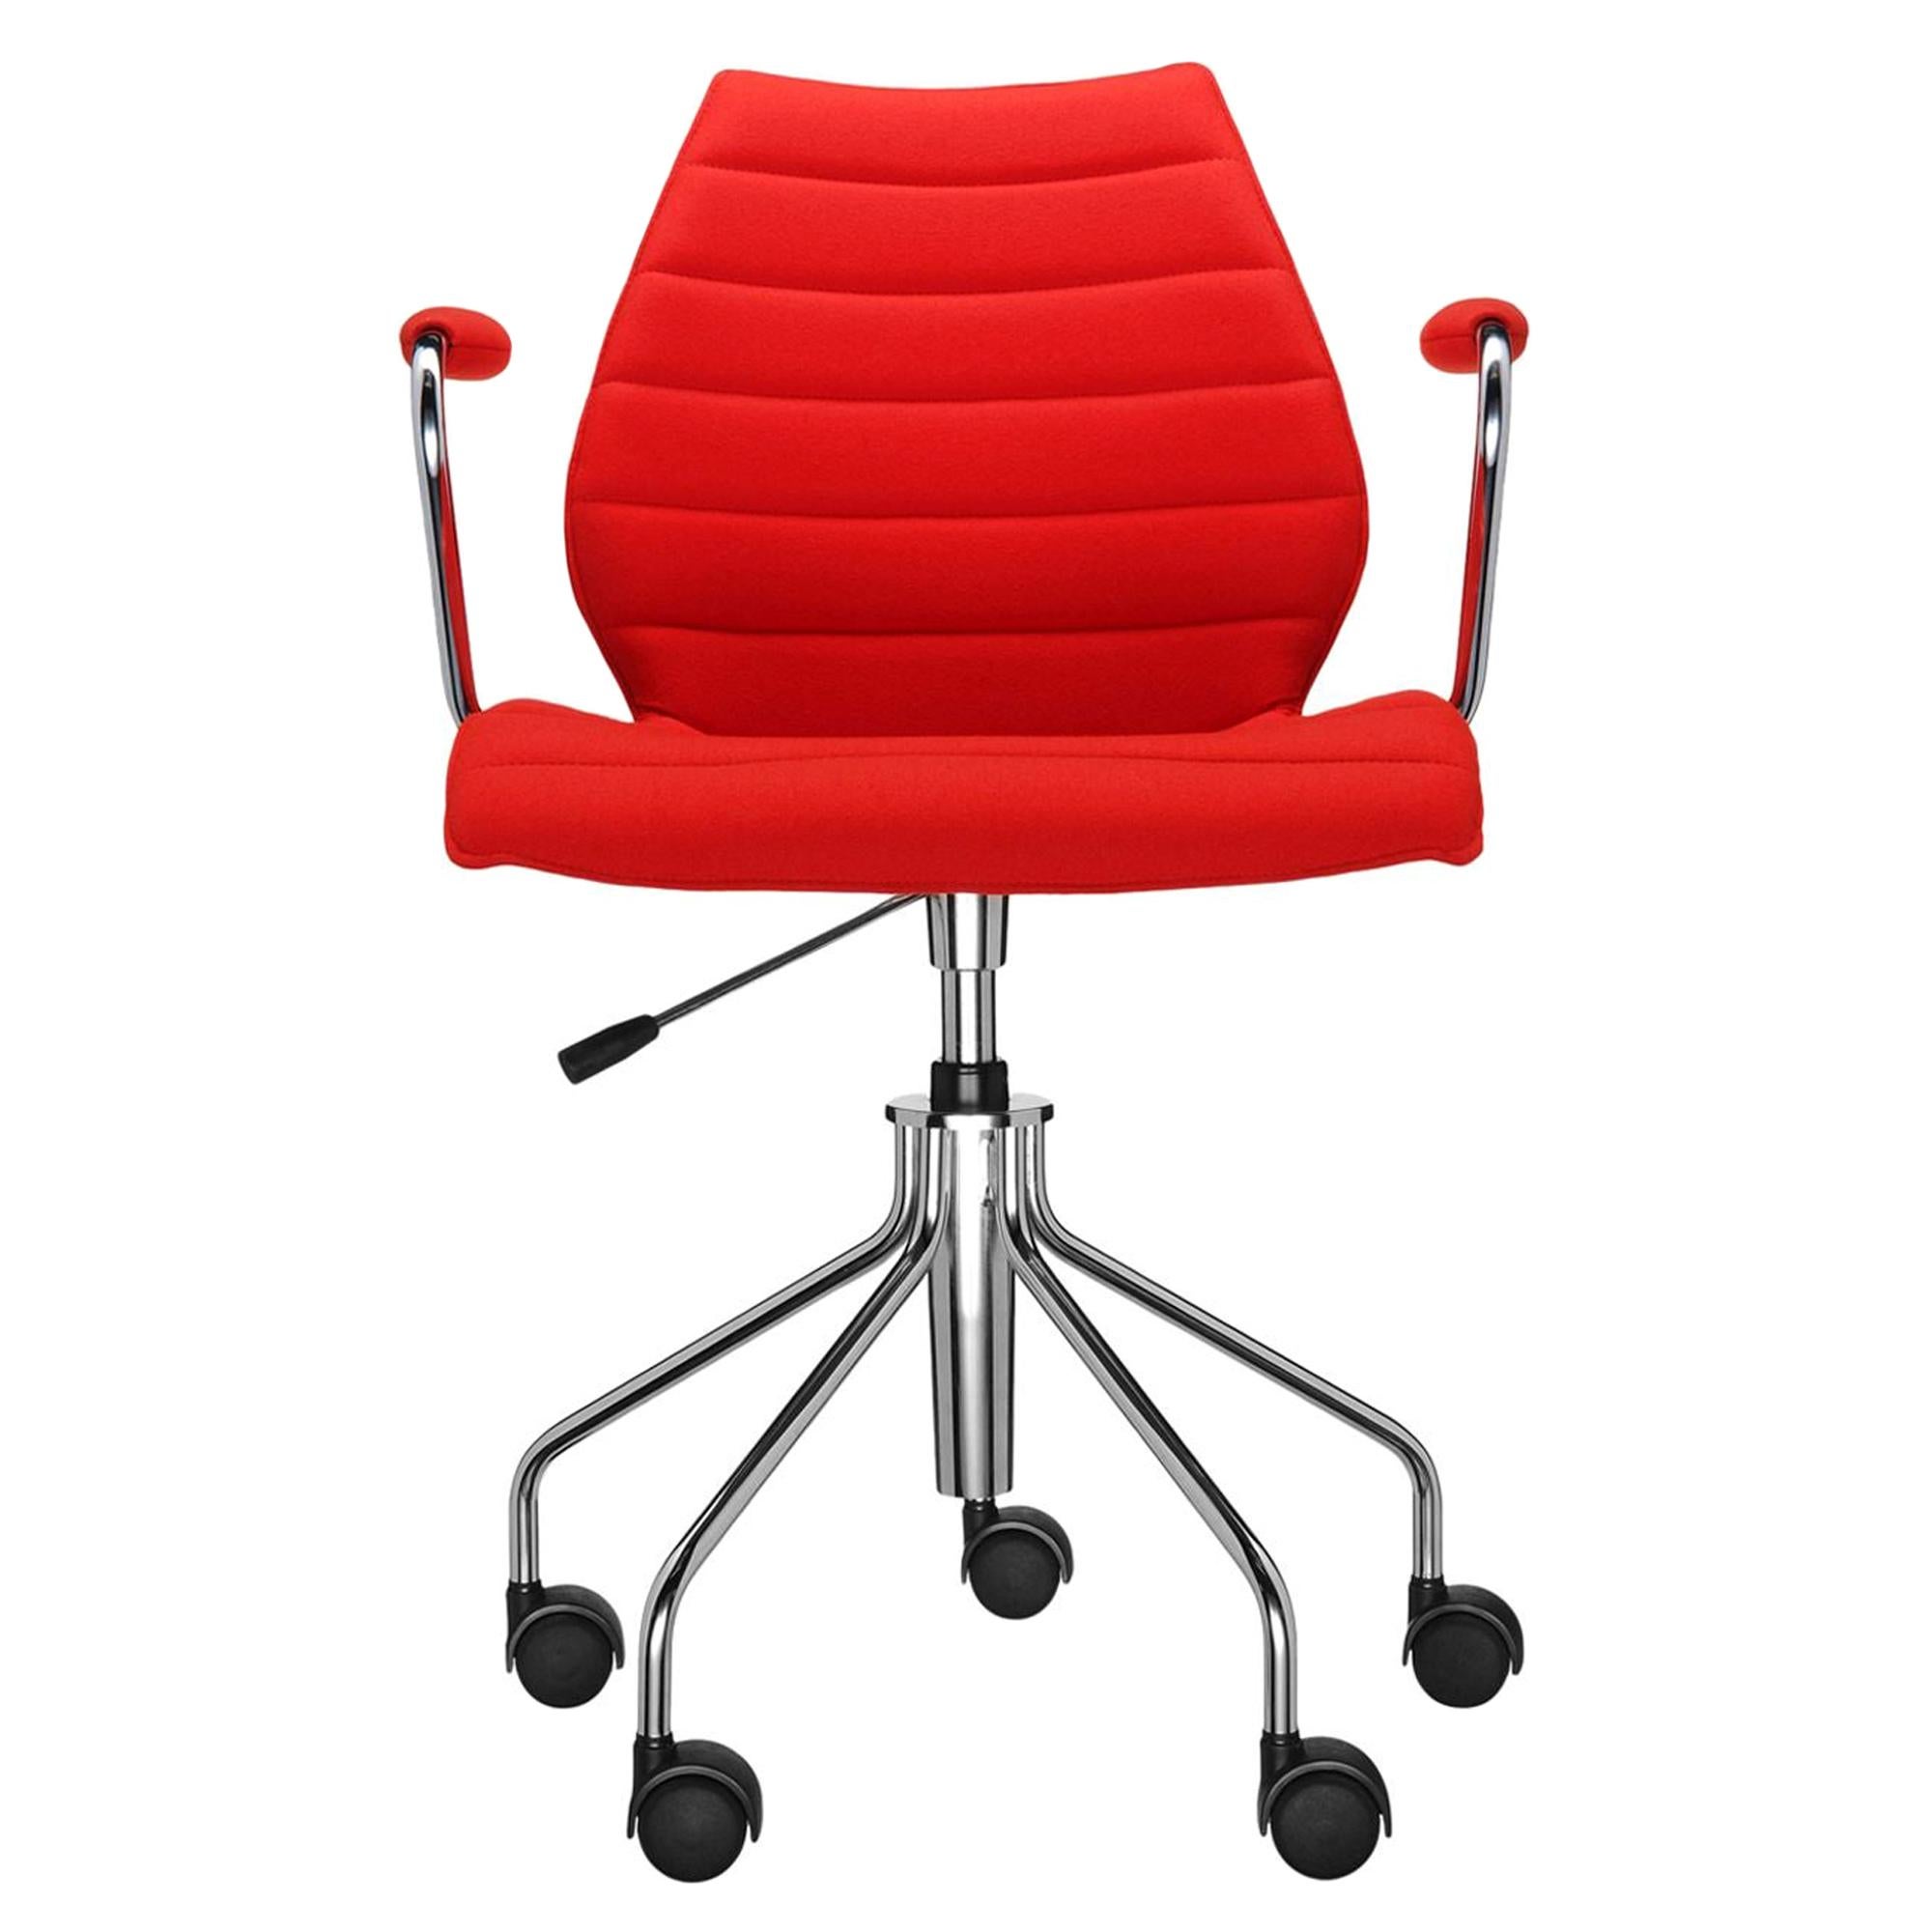 Kartell Maui Soft Trevira ArmChair in Red by Vico Magistretti